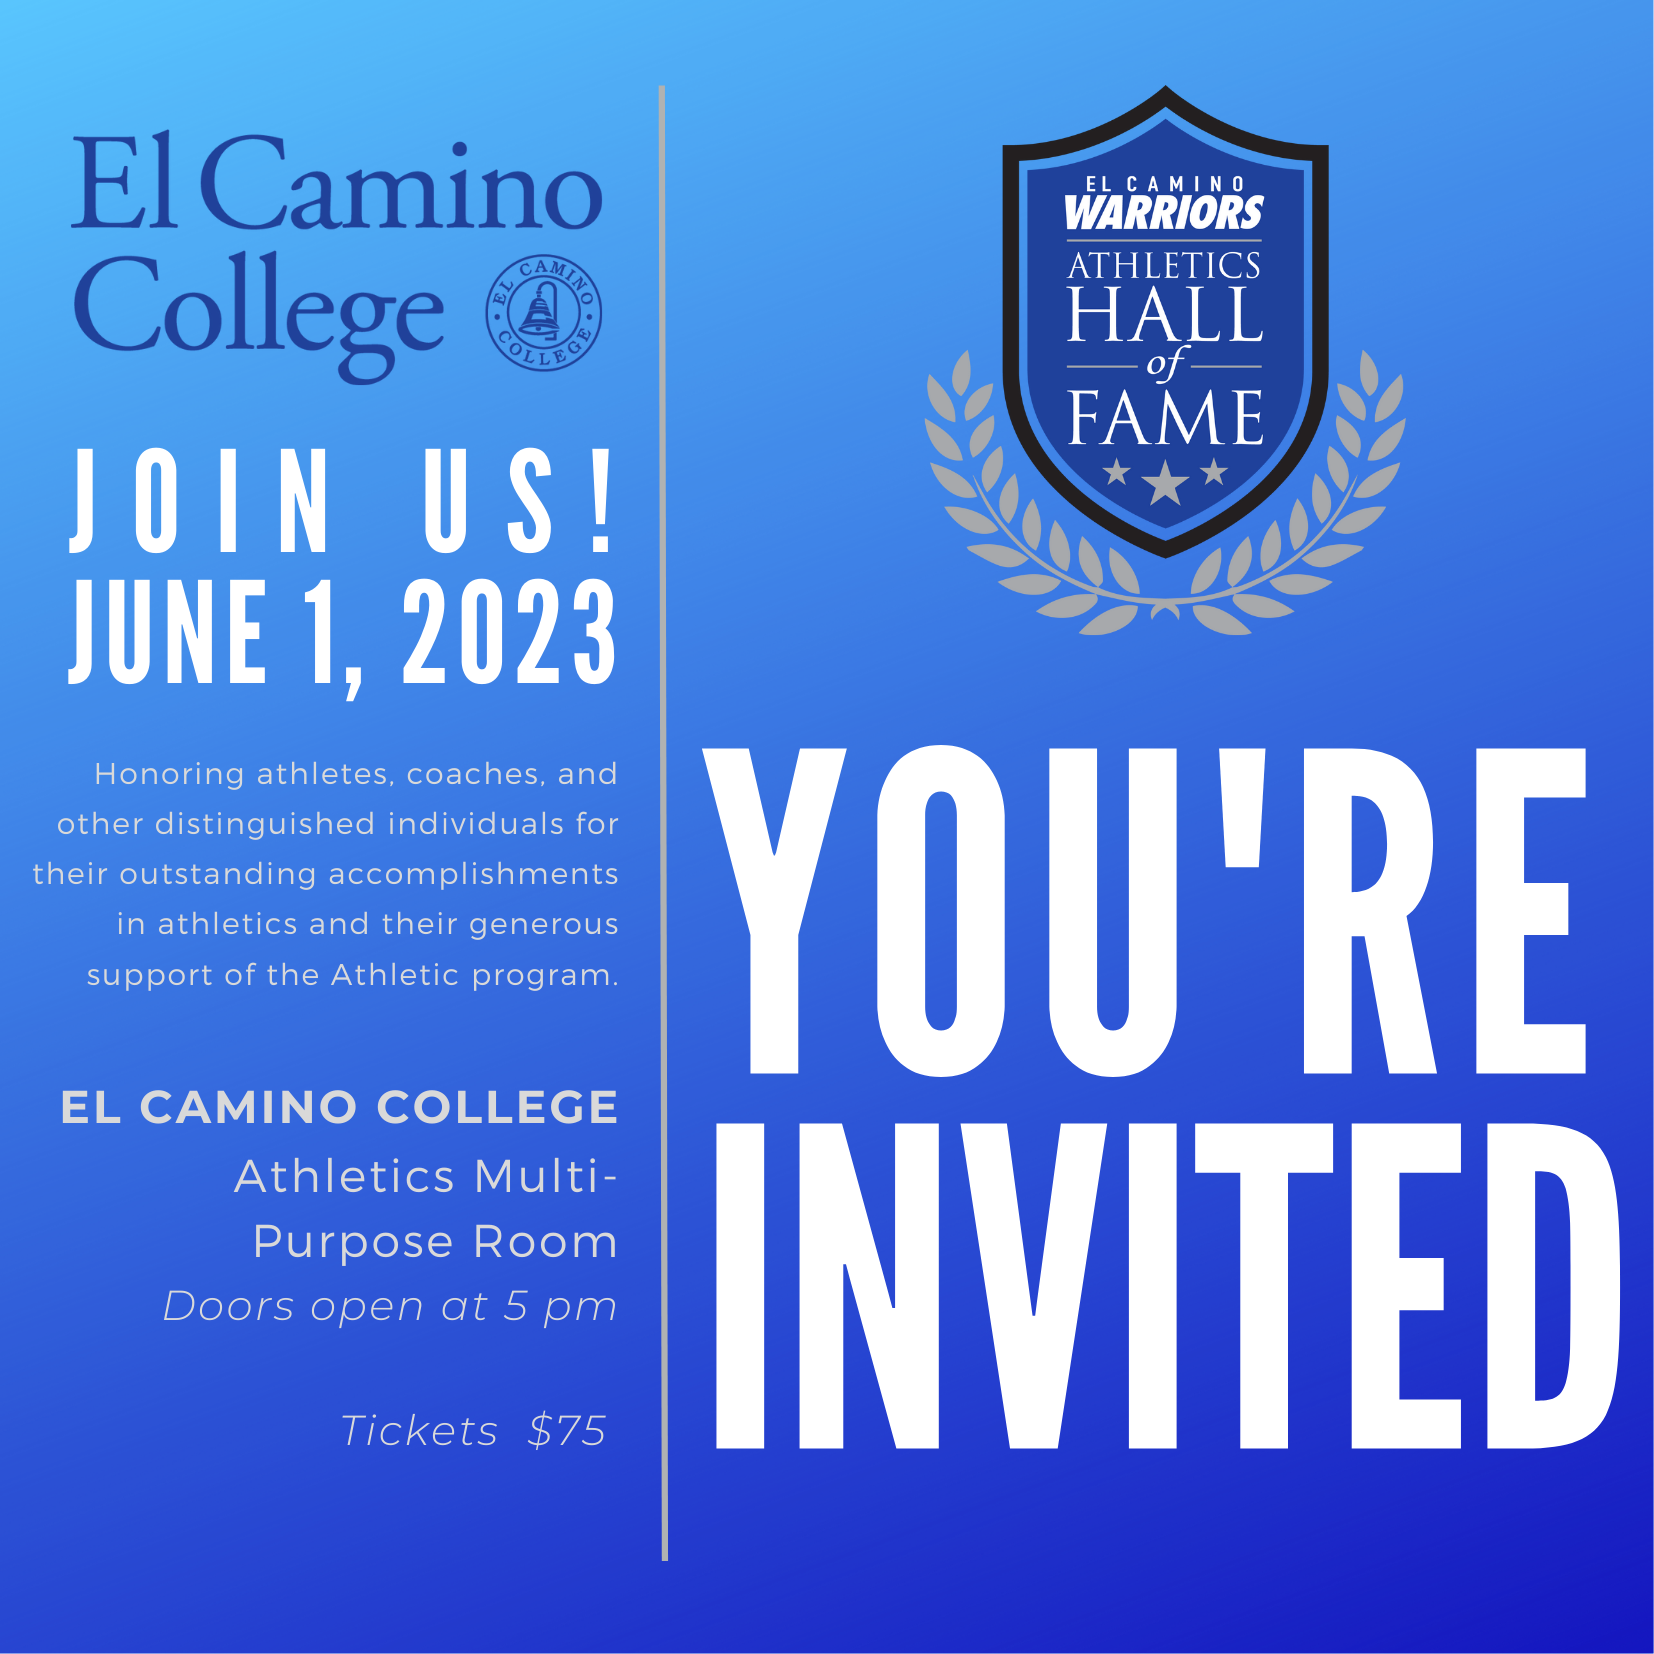 El Camino College Hall of Fame Committee Announces Class of 2023